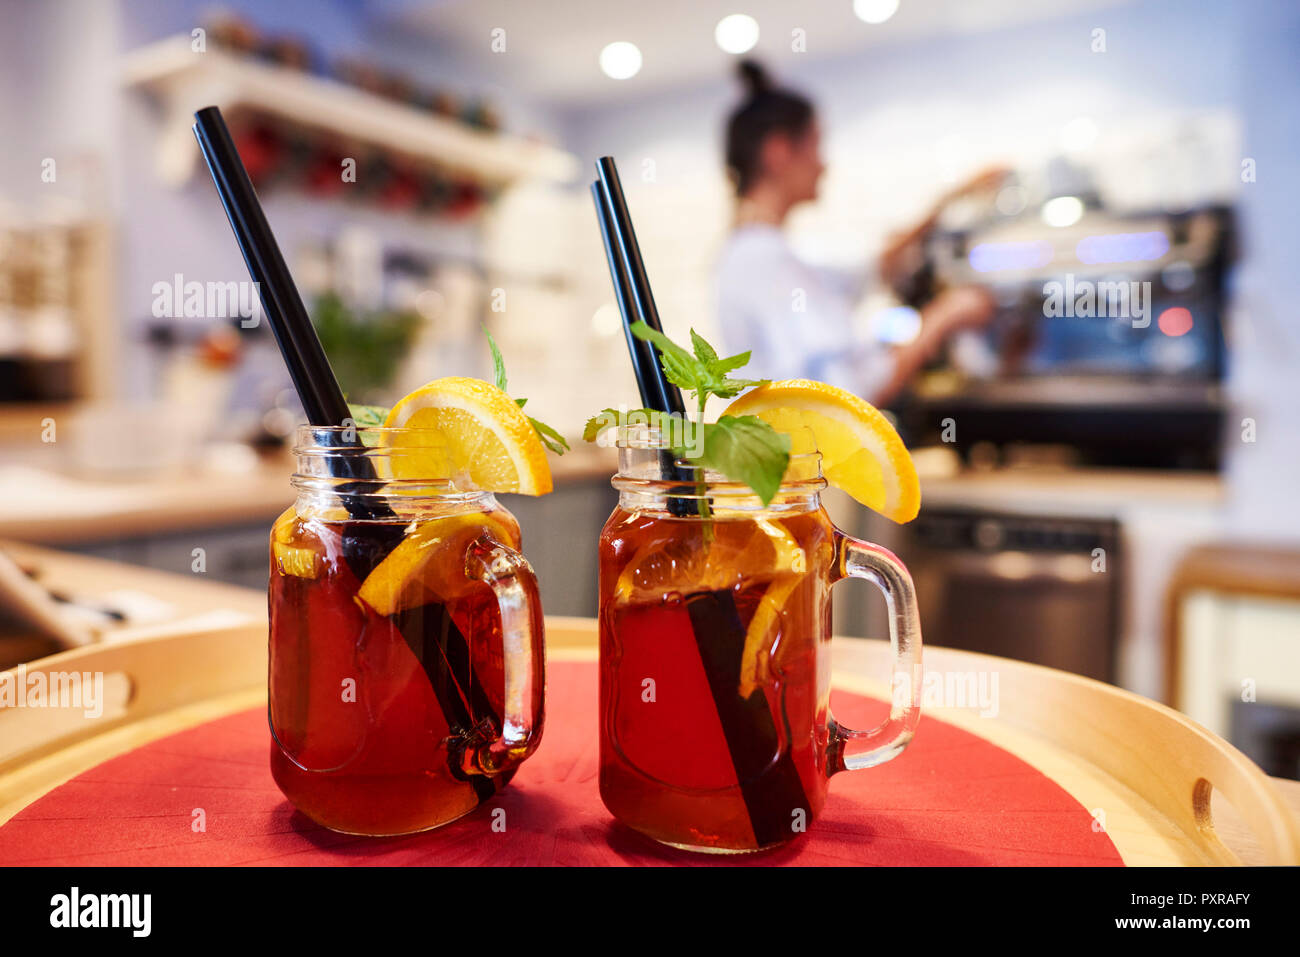 Two glasses of ice tea on a tray Stock Photo